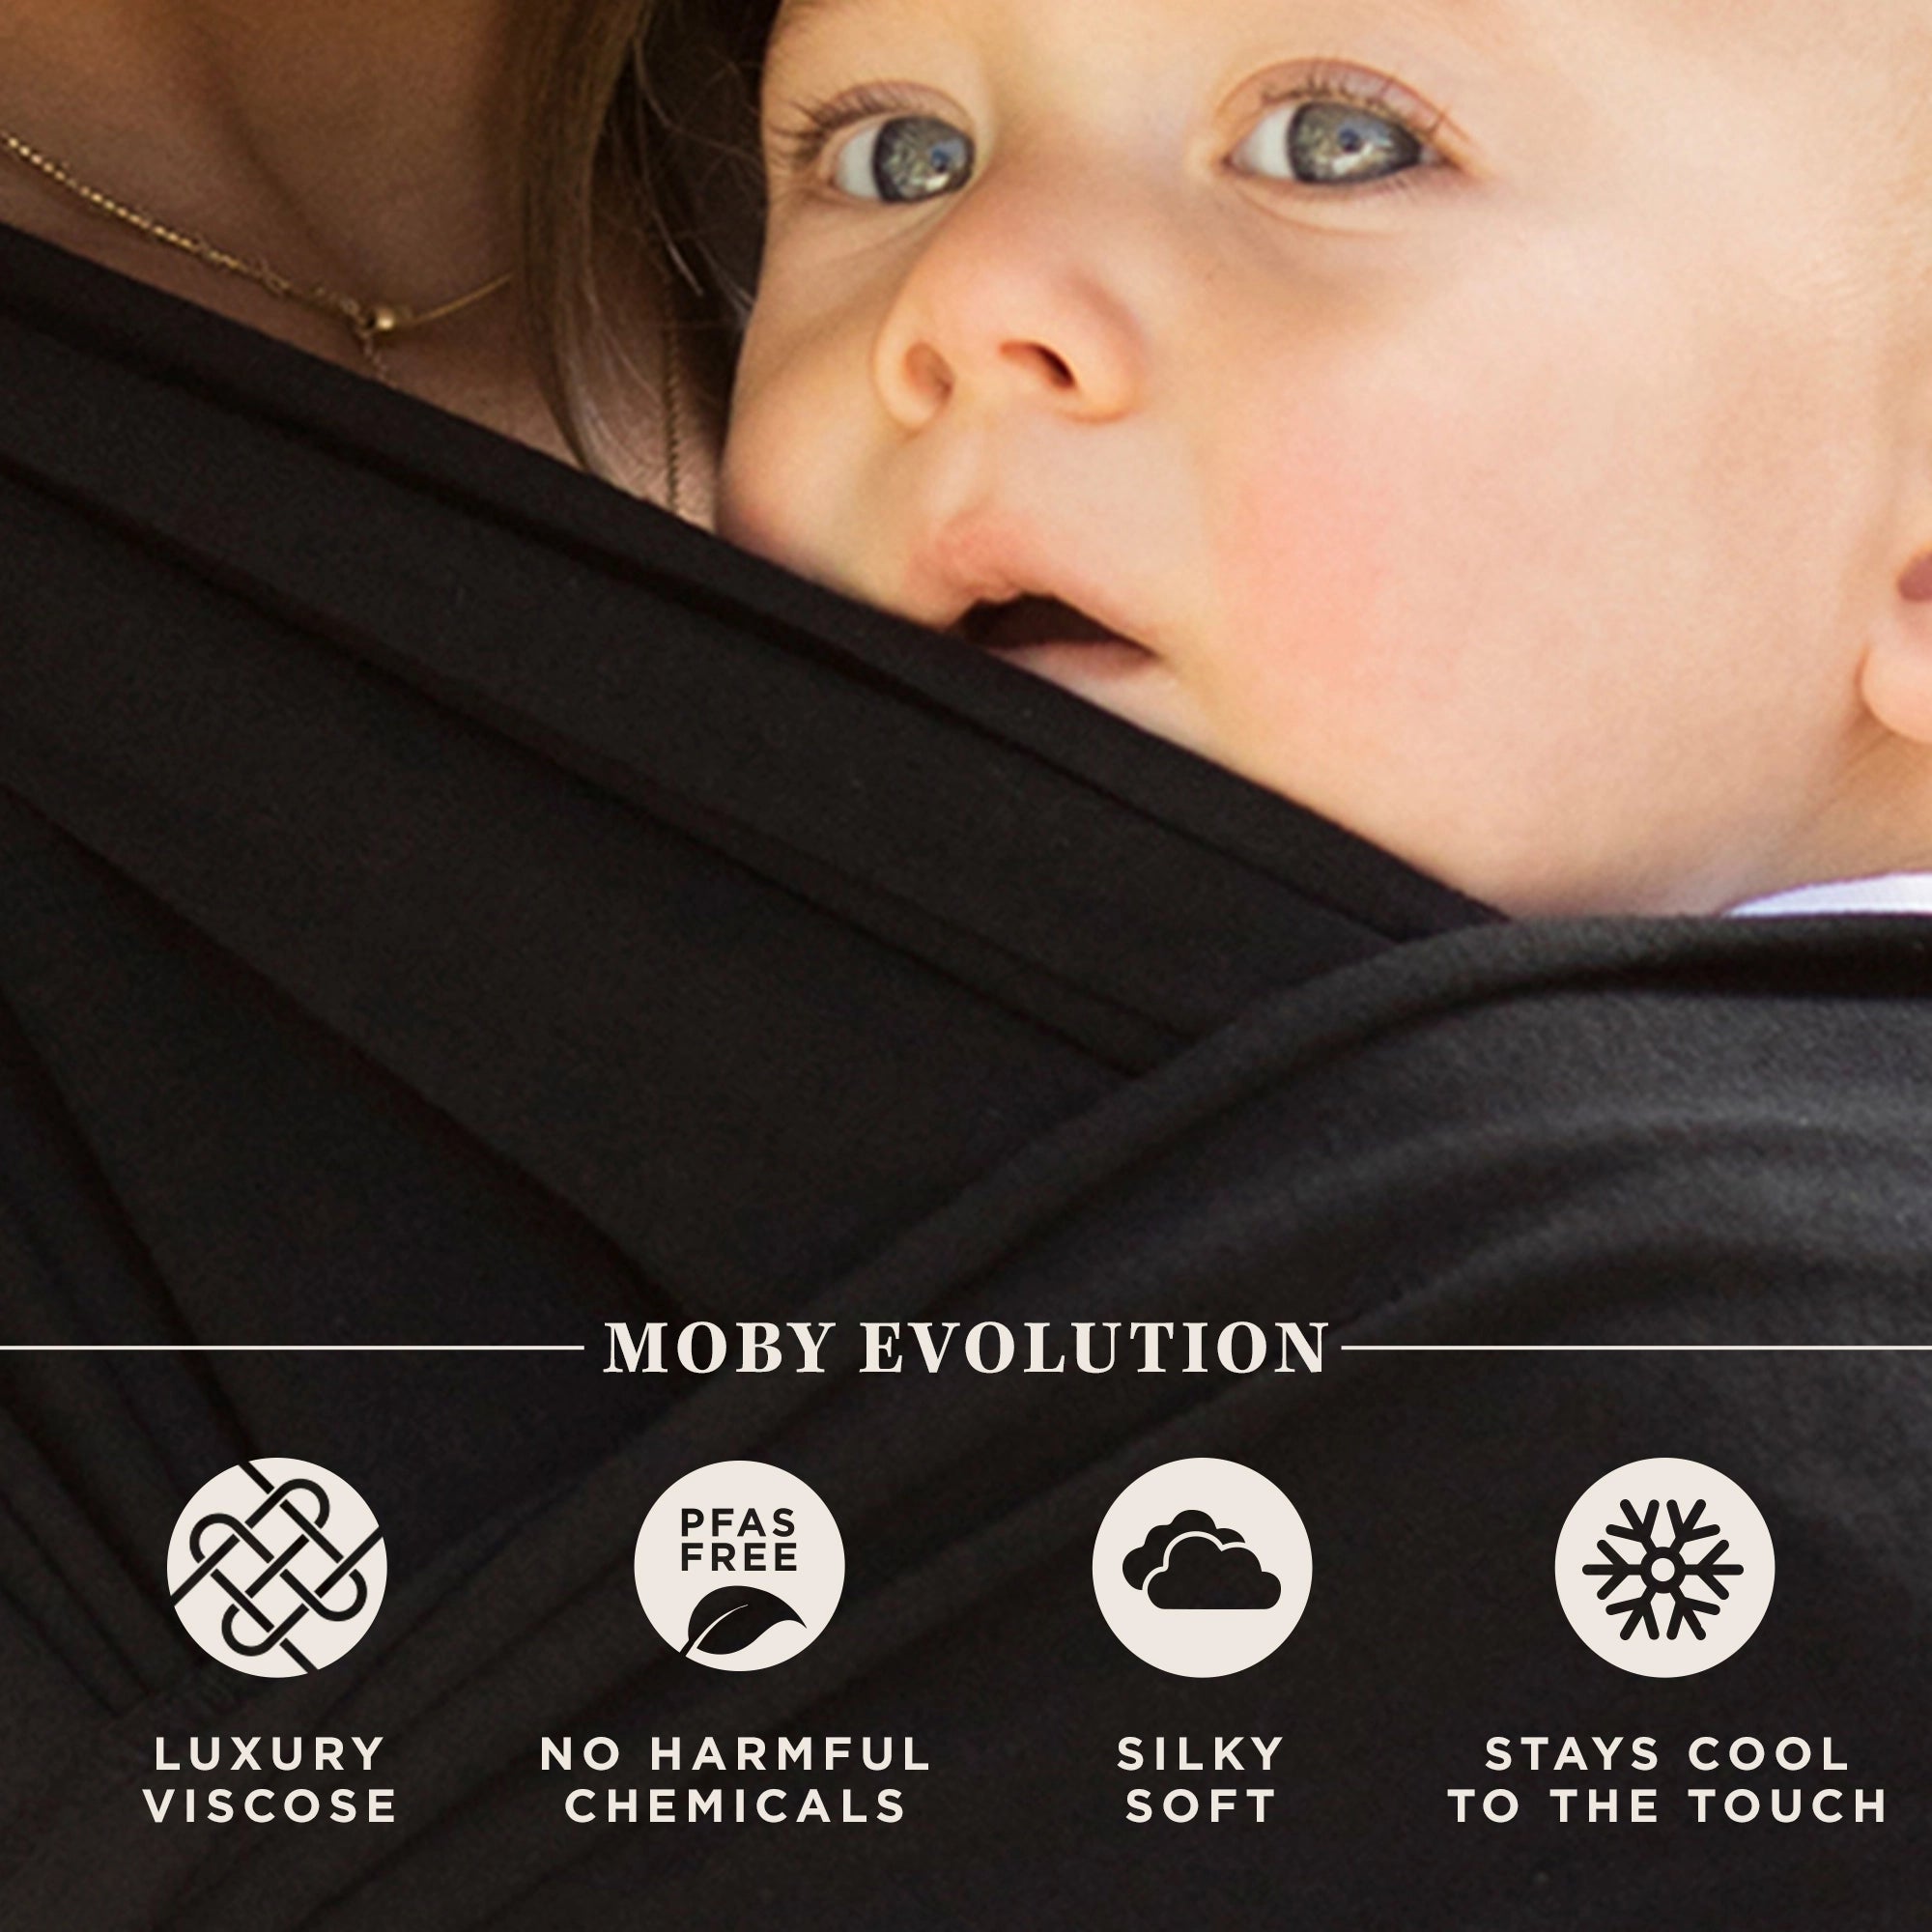 moby evolution features luxury viscose, no harmful chemicals, pfas free, silky soft, stays cool to the touch